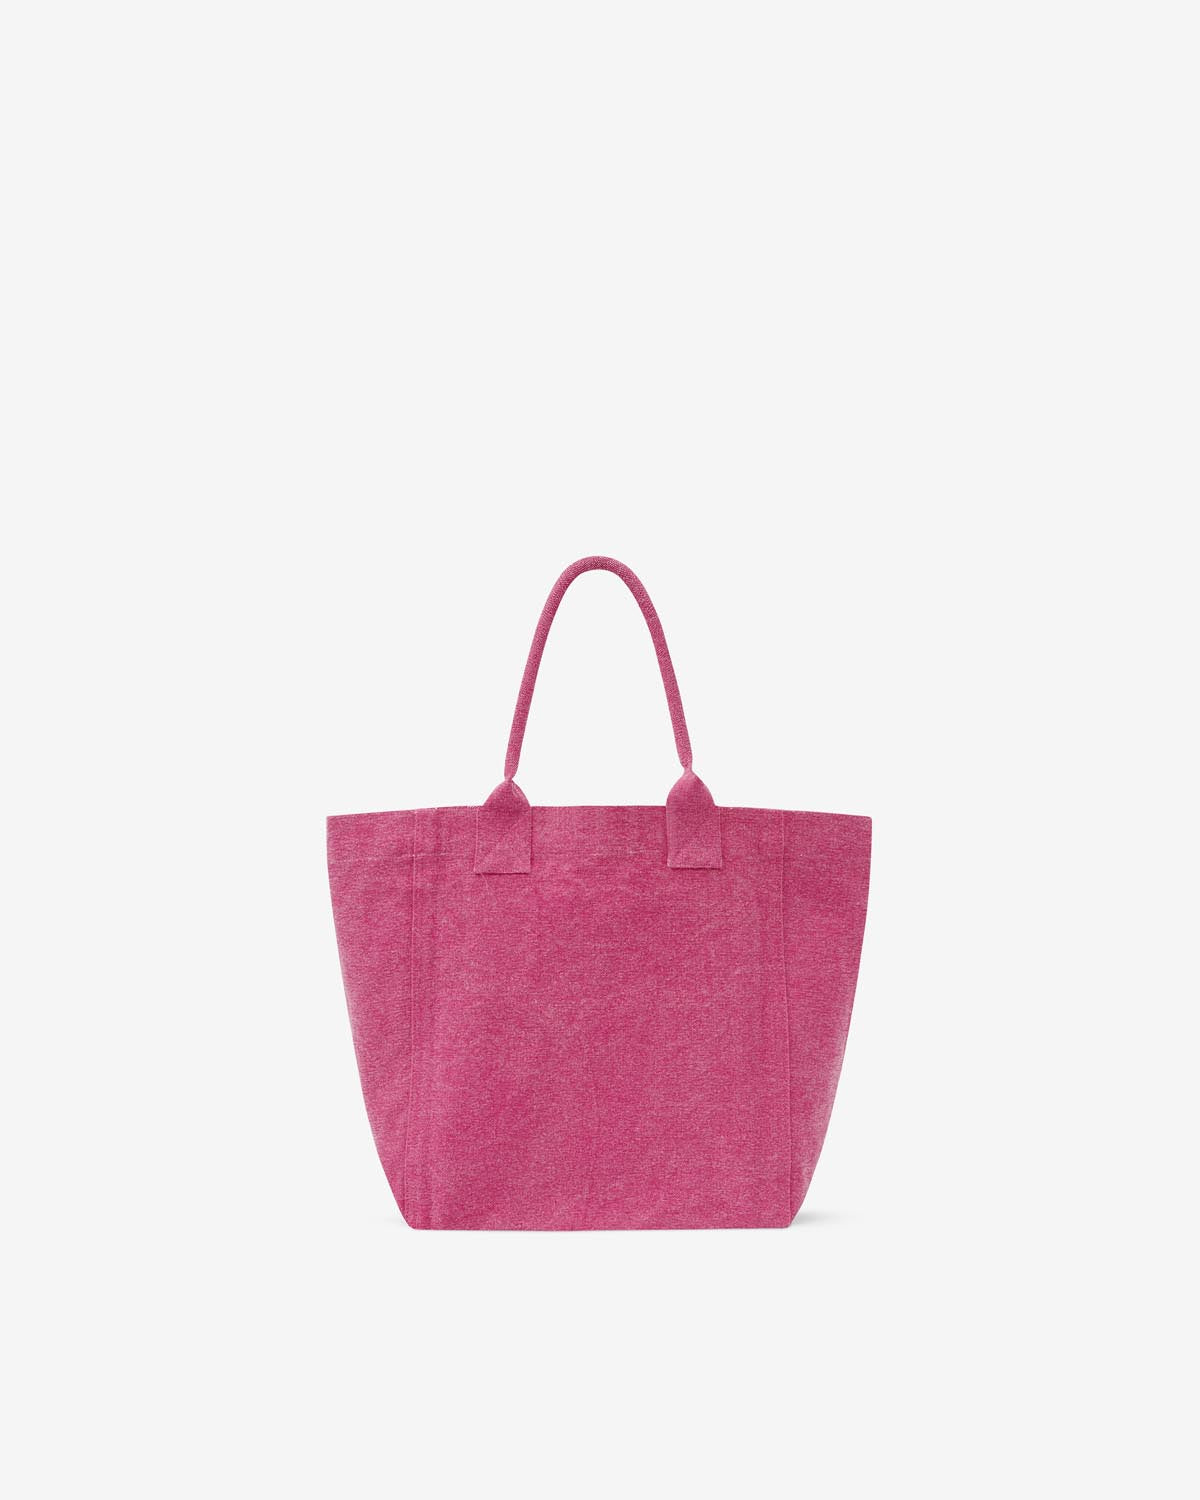 Tote bag yenky small Woman Rosa 4